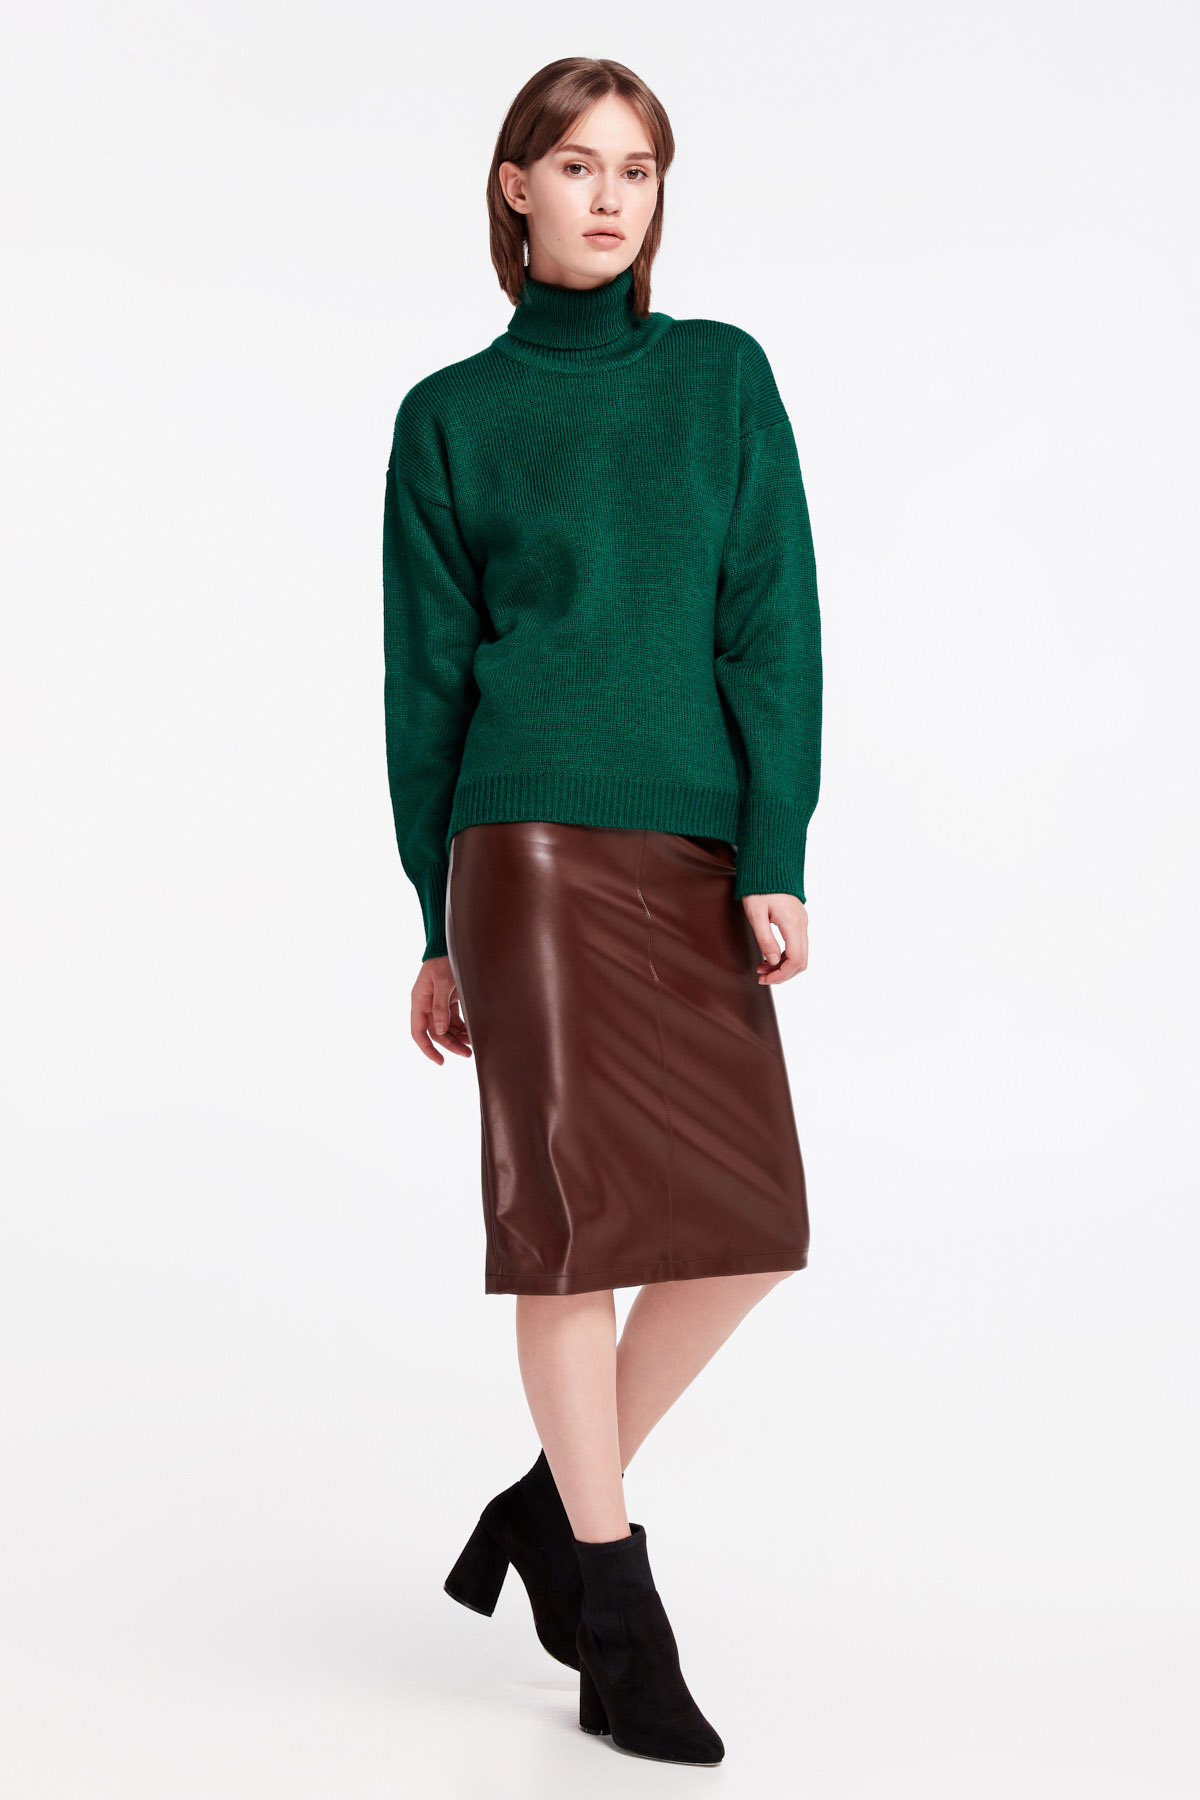 Green knit polo neck sweater, photo 6